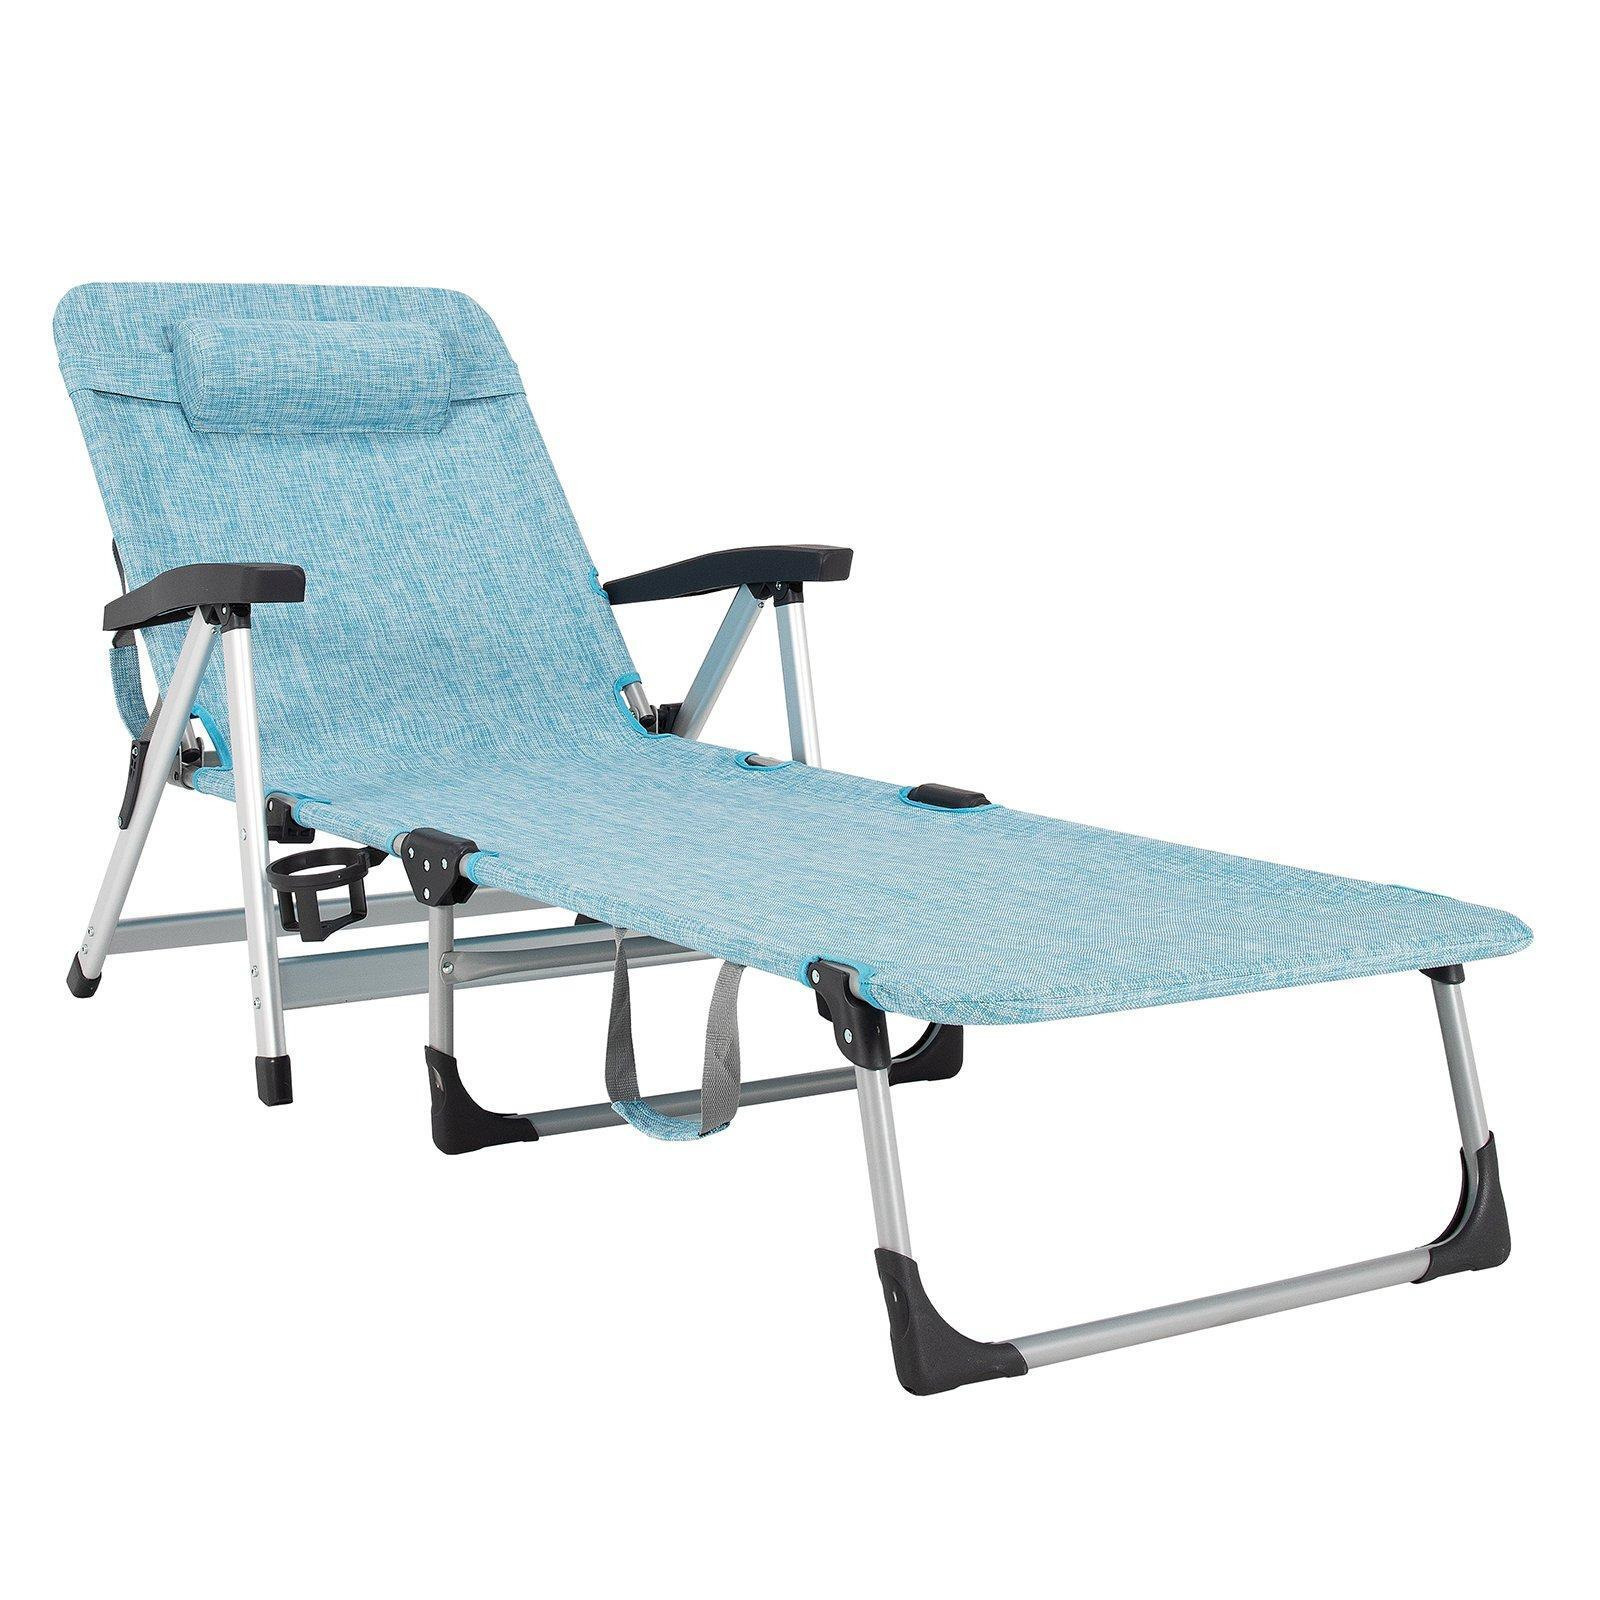 Folding Outdoor Chaise Lounger Patio Lounge Chair - image 1